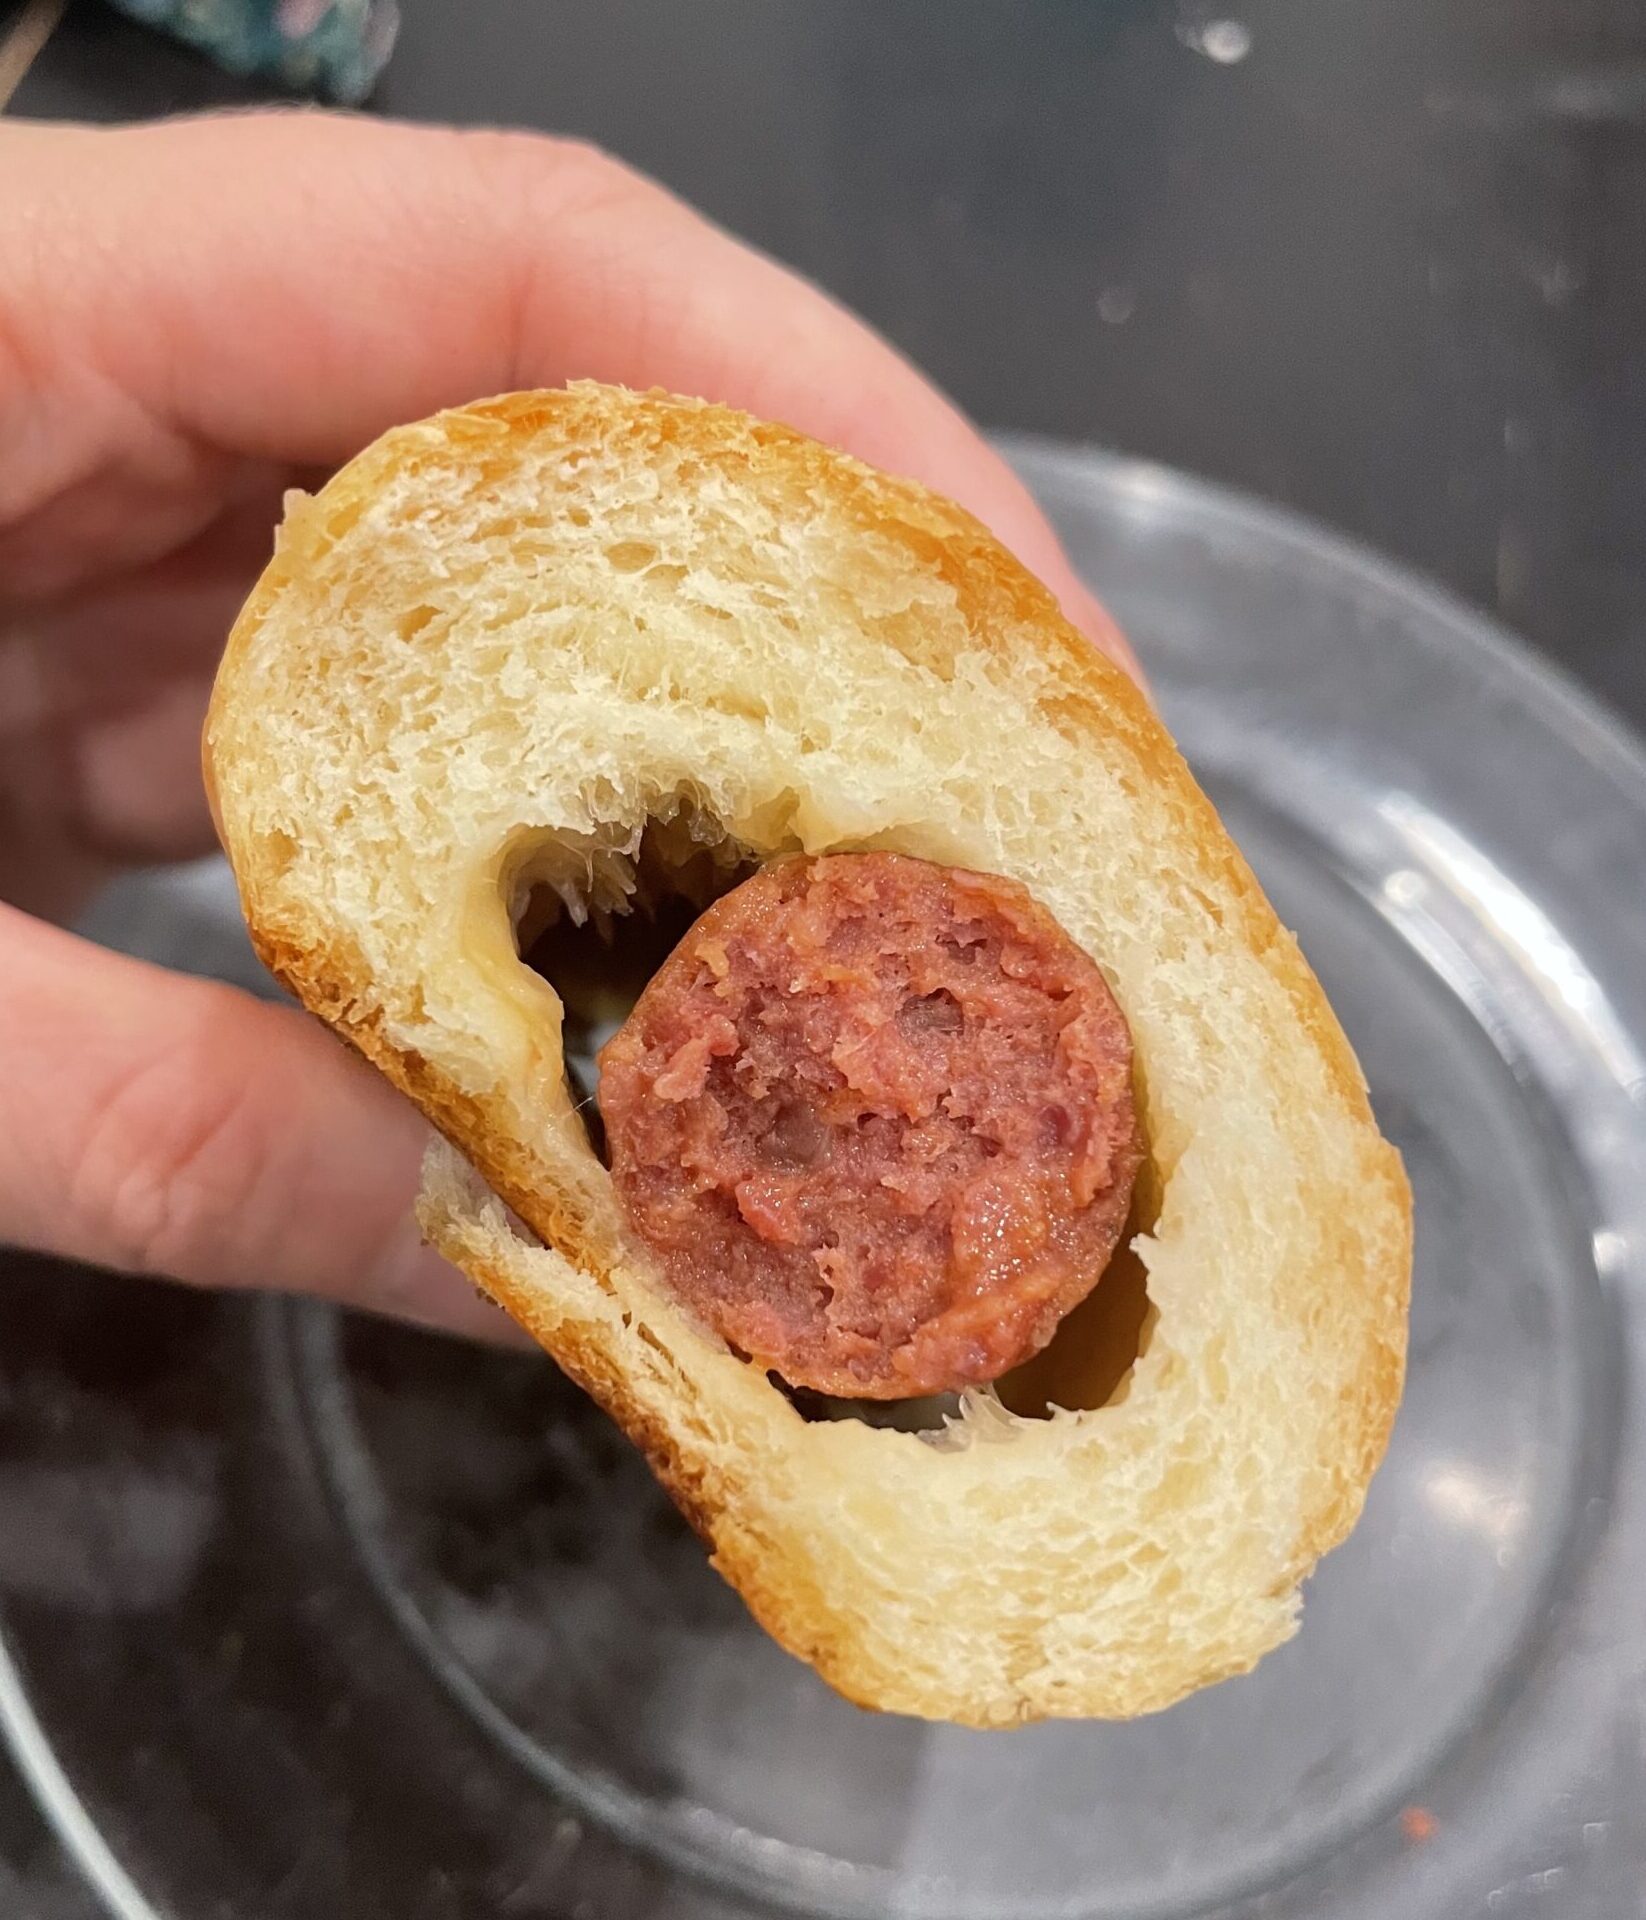 The Klobasnek from Brooklyn Kolache are packed with flavor!